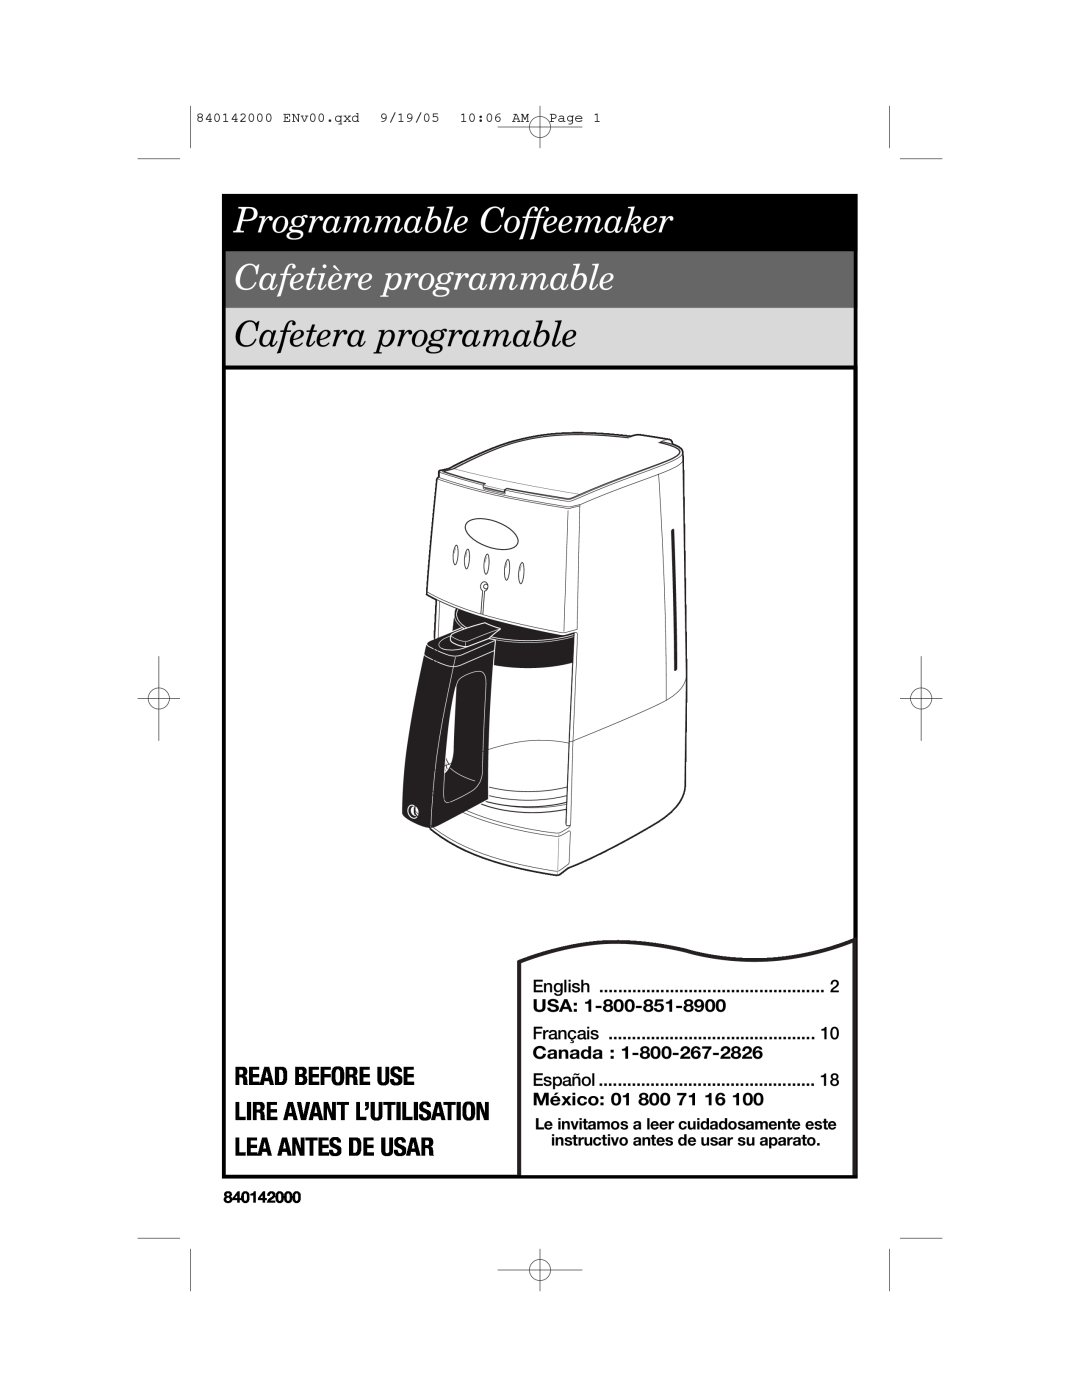 Hamilton Beach 840142000 manual Read Before Use, Programmable Coffeemaker Cafetière programmable, Cafetera programable 